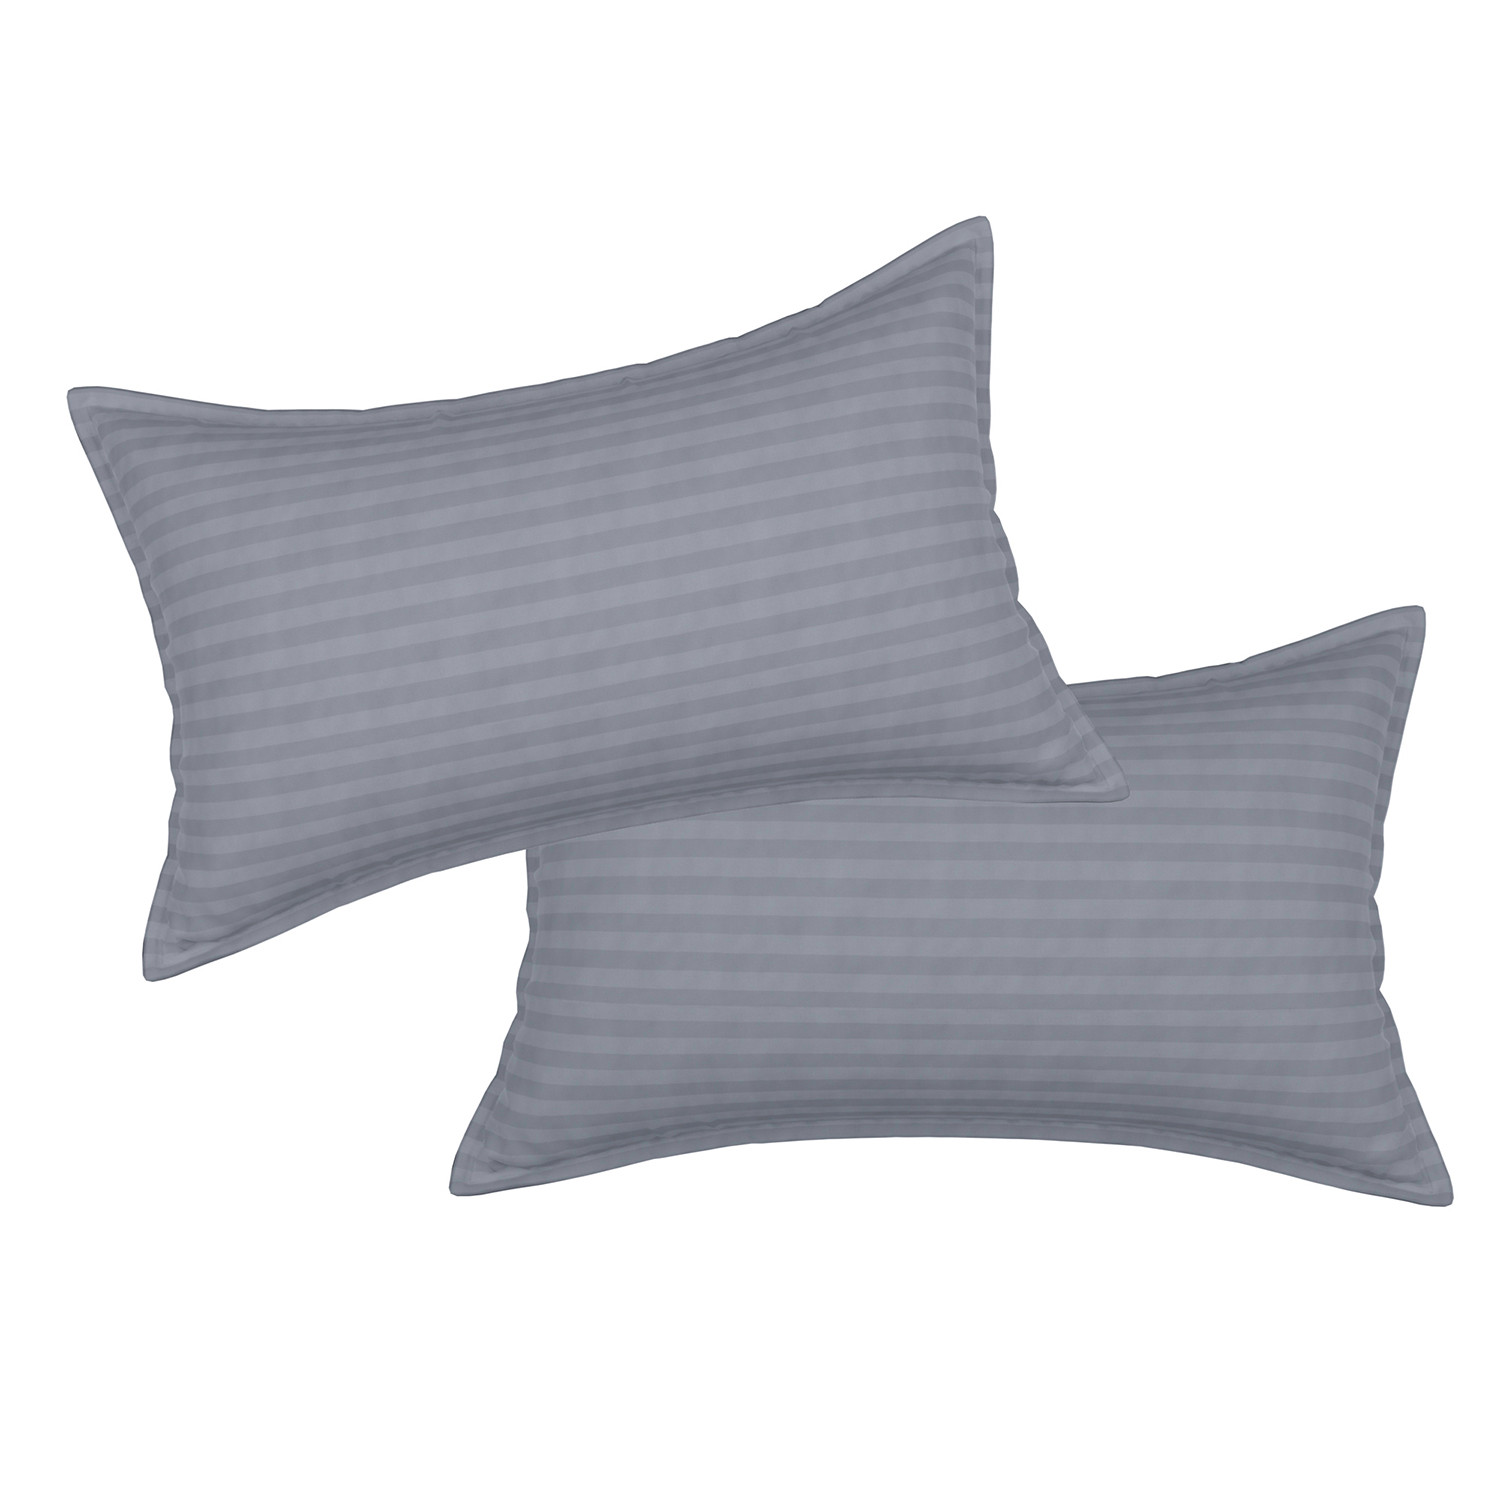 Kuber Industries Pillow Cover | Cotton Pillow Cover | Striped Pattern Pillow Cover | Soft Pillow Cover for Home | Pillow Cover for Bedroom| Gray